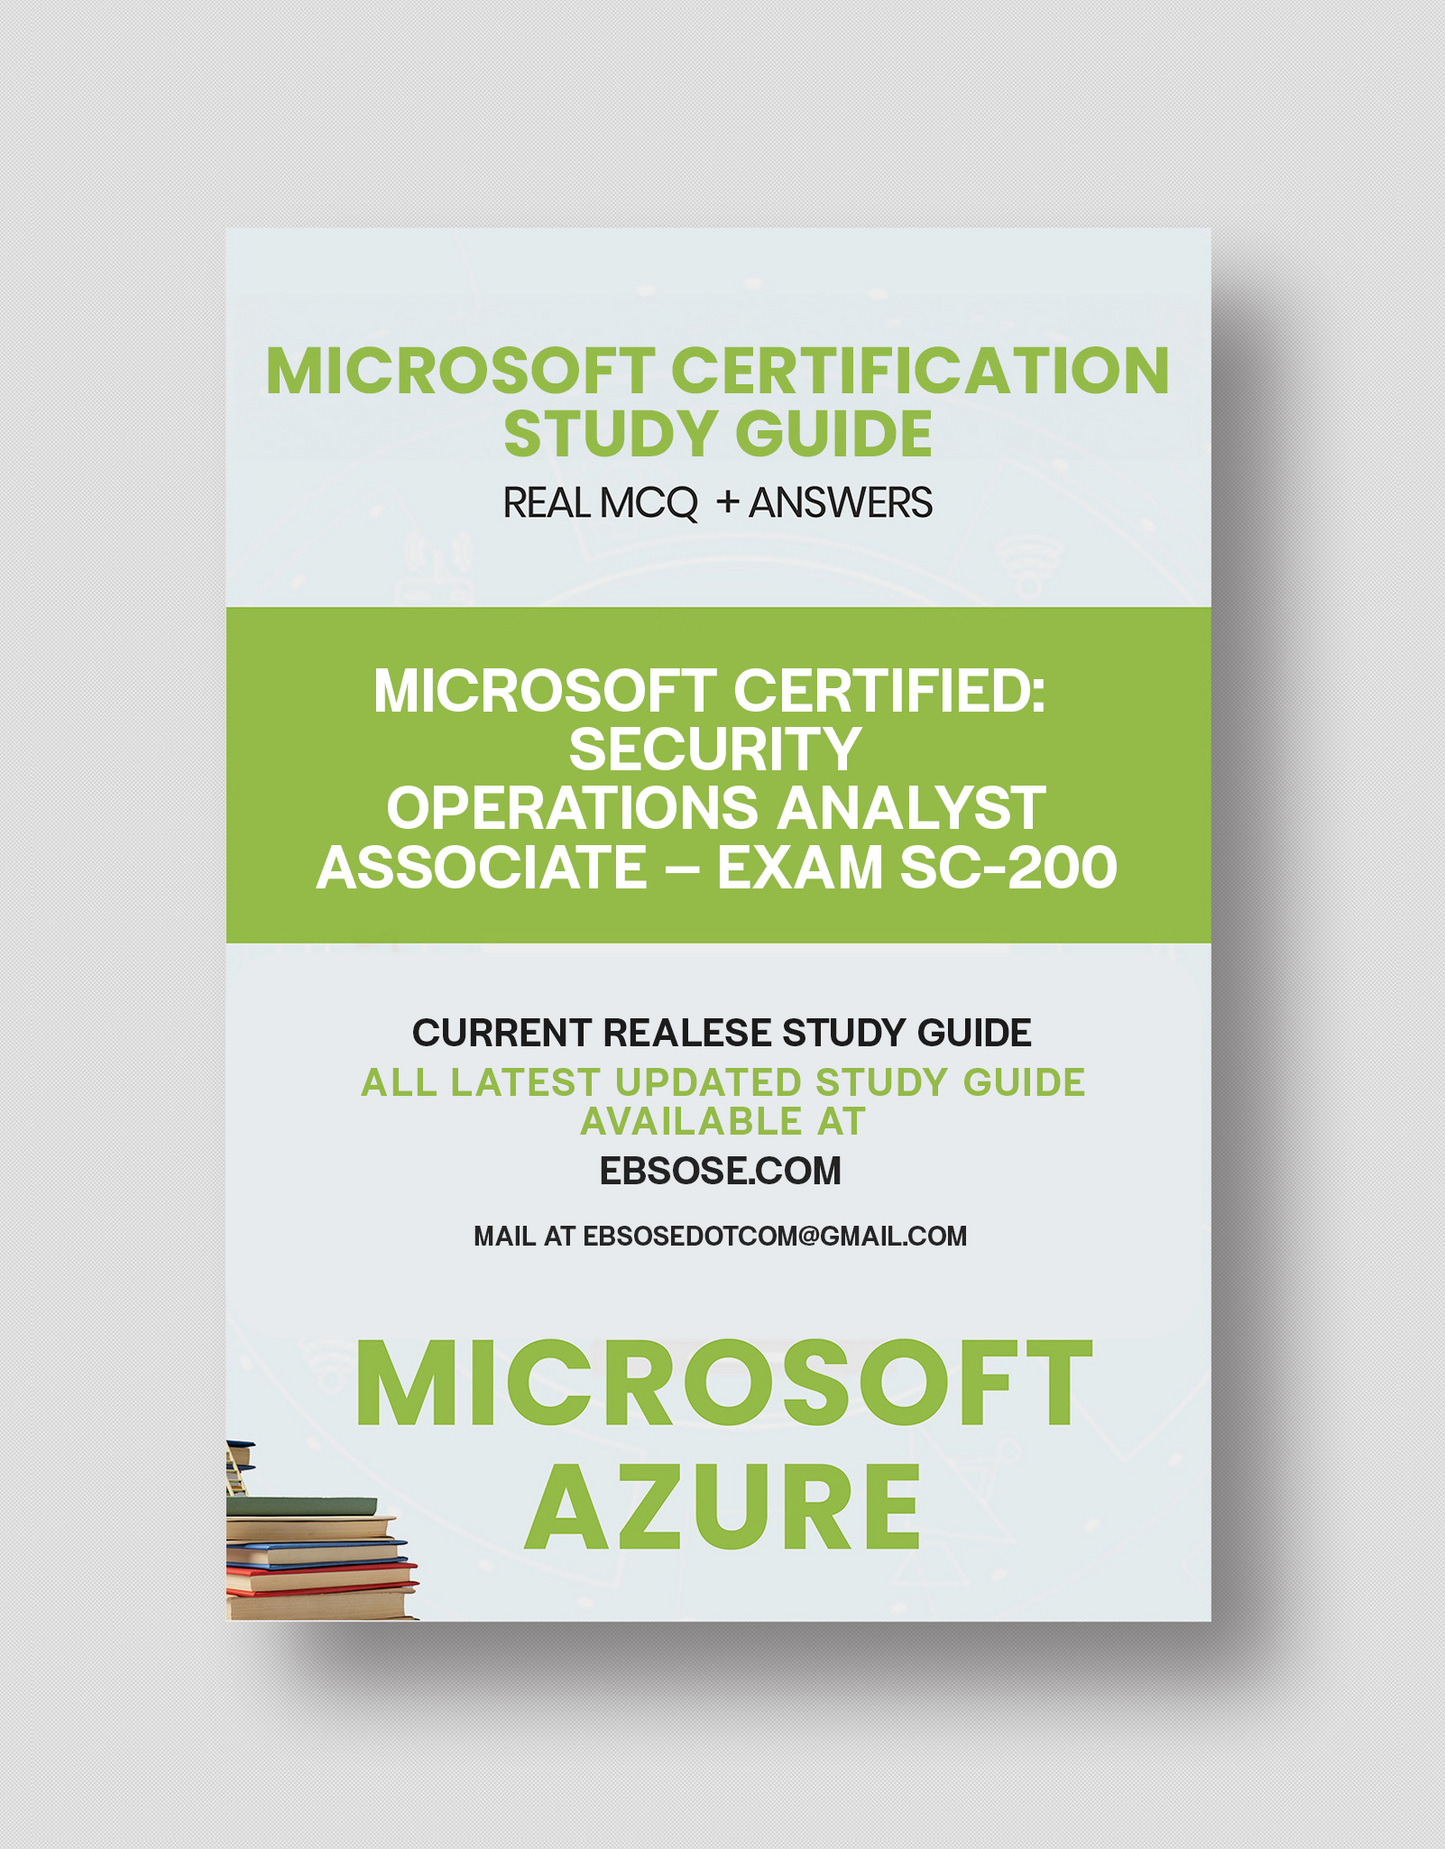 Microsoft Certified: Security Operations Analyst Associate – Exam SC-200